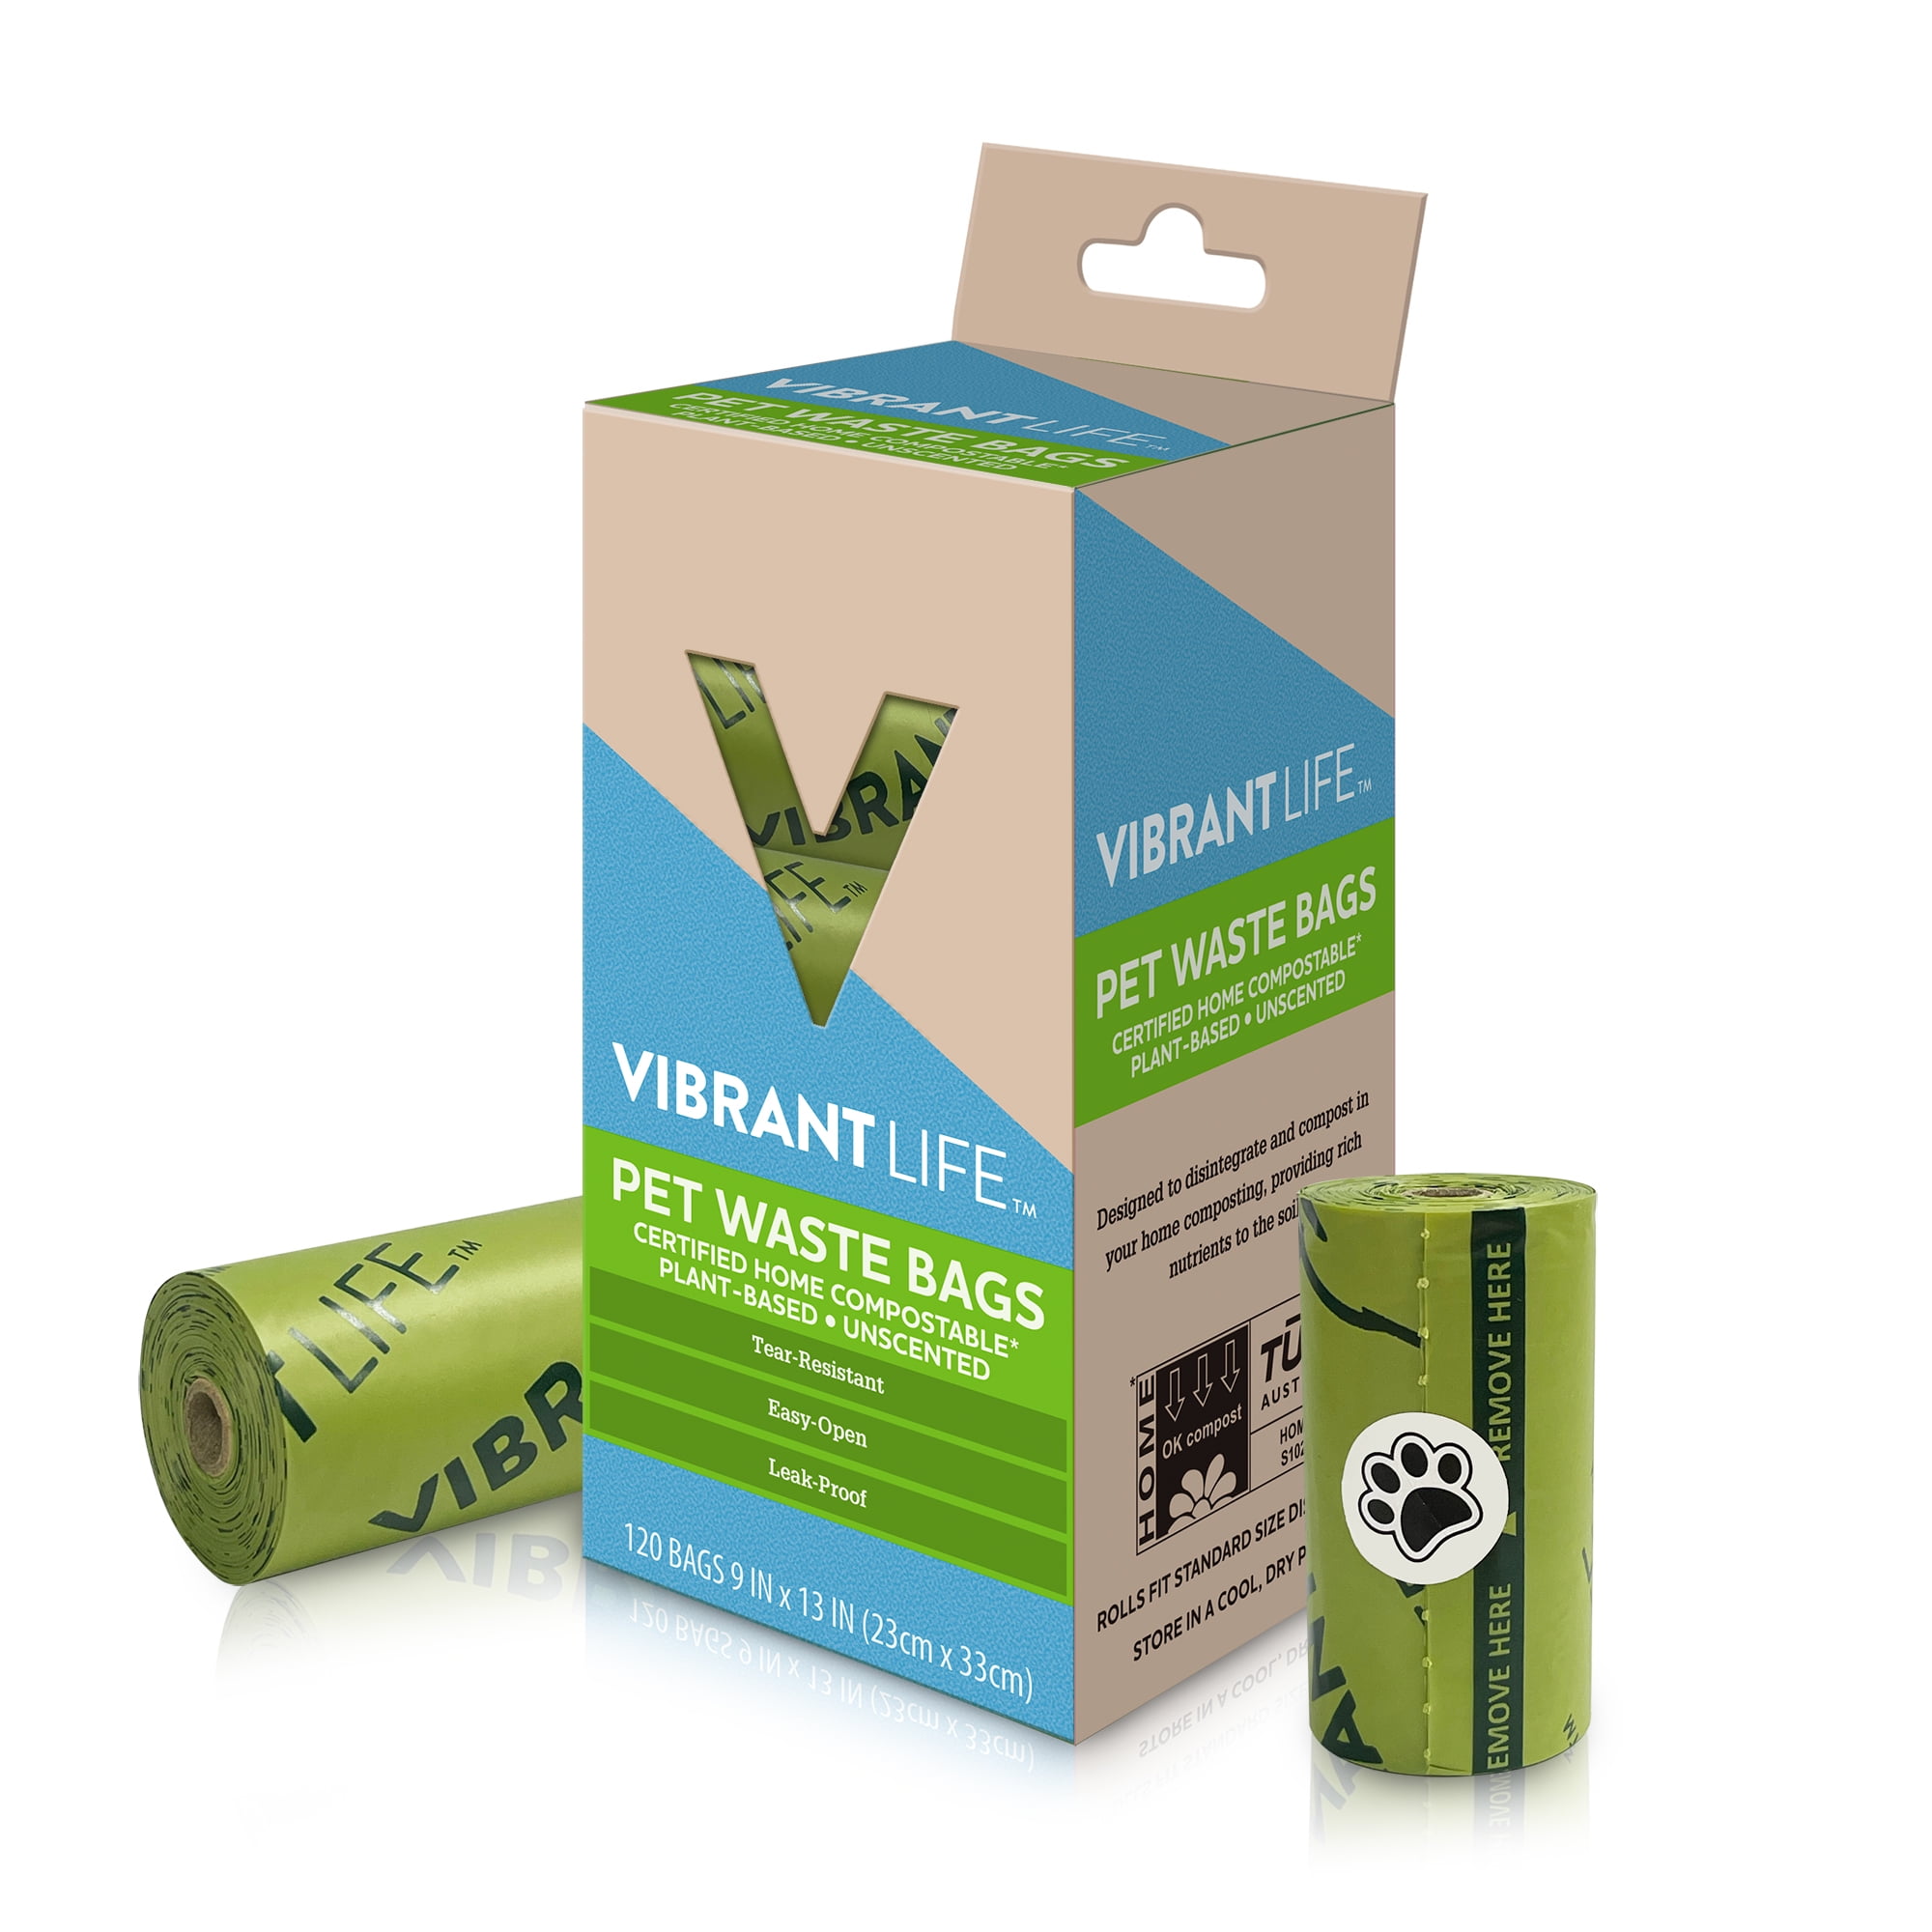 Vibrant Life Compostable and Planet-Friendly Pet Waste Bags - 9 x 13 in